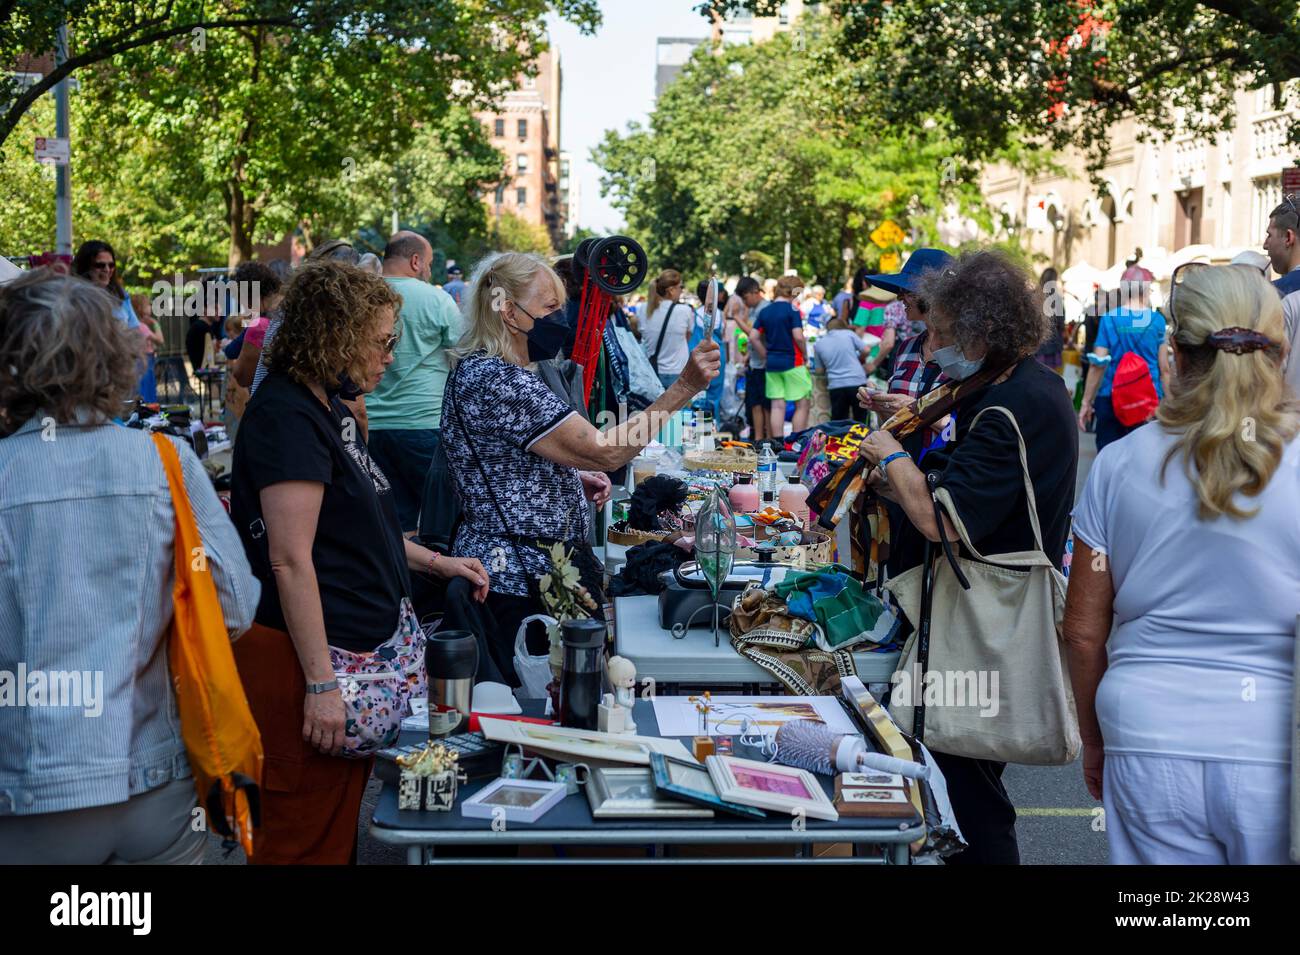 Shoppers search for bargains at the humongous annual Penn South Flea Market in the New York neighborhood of Chelsea on Saturday, September 17, 2022. The flea market appears like Brigadoon, only once every year, and the residents of the 20 building Penn South cooperative have a closet cleaning extravaganza. Shoppers from around the city come to the flea market which attracts thousands passing through.  (© Richard B. Levine) Stock Photo